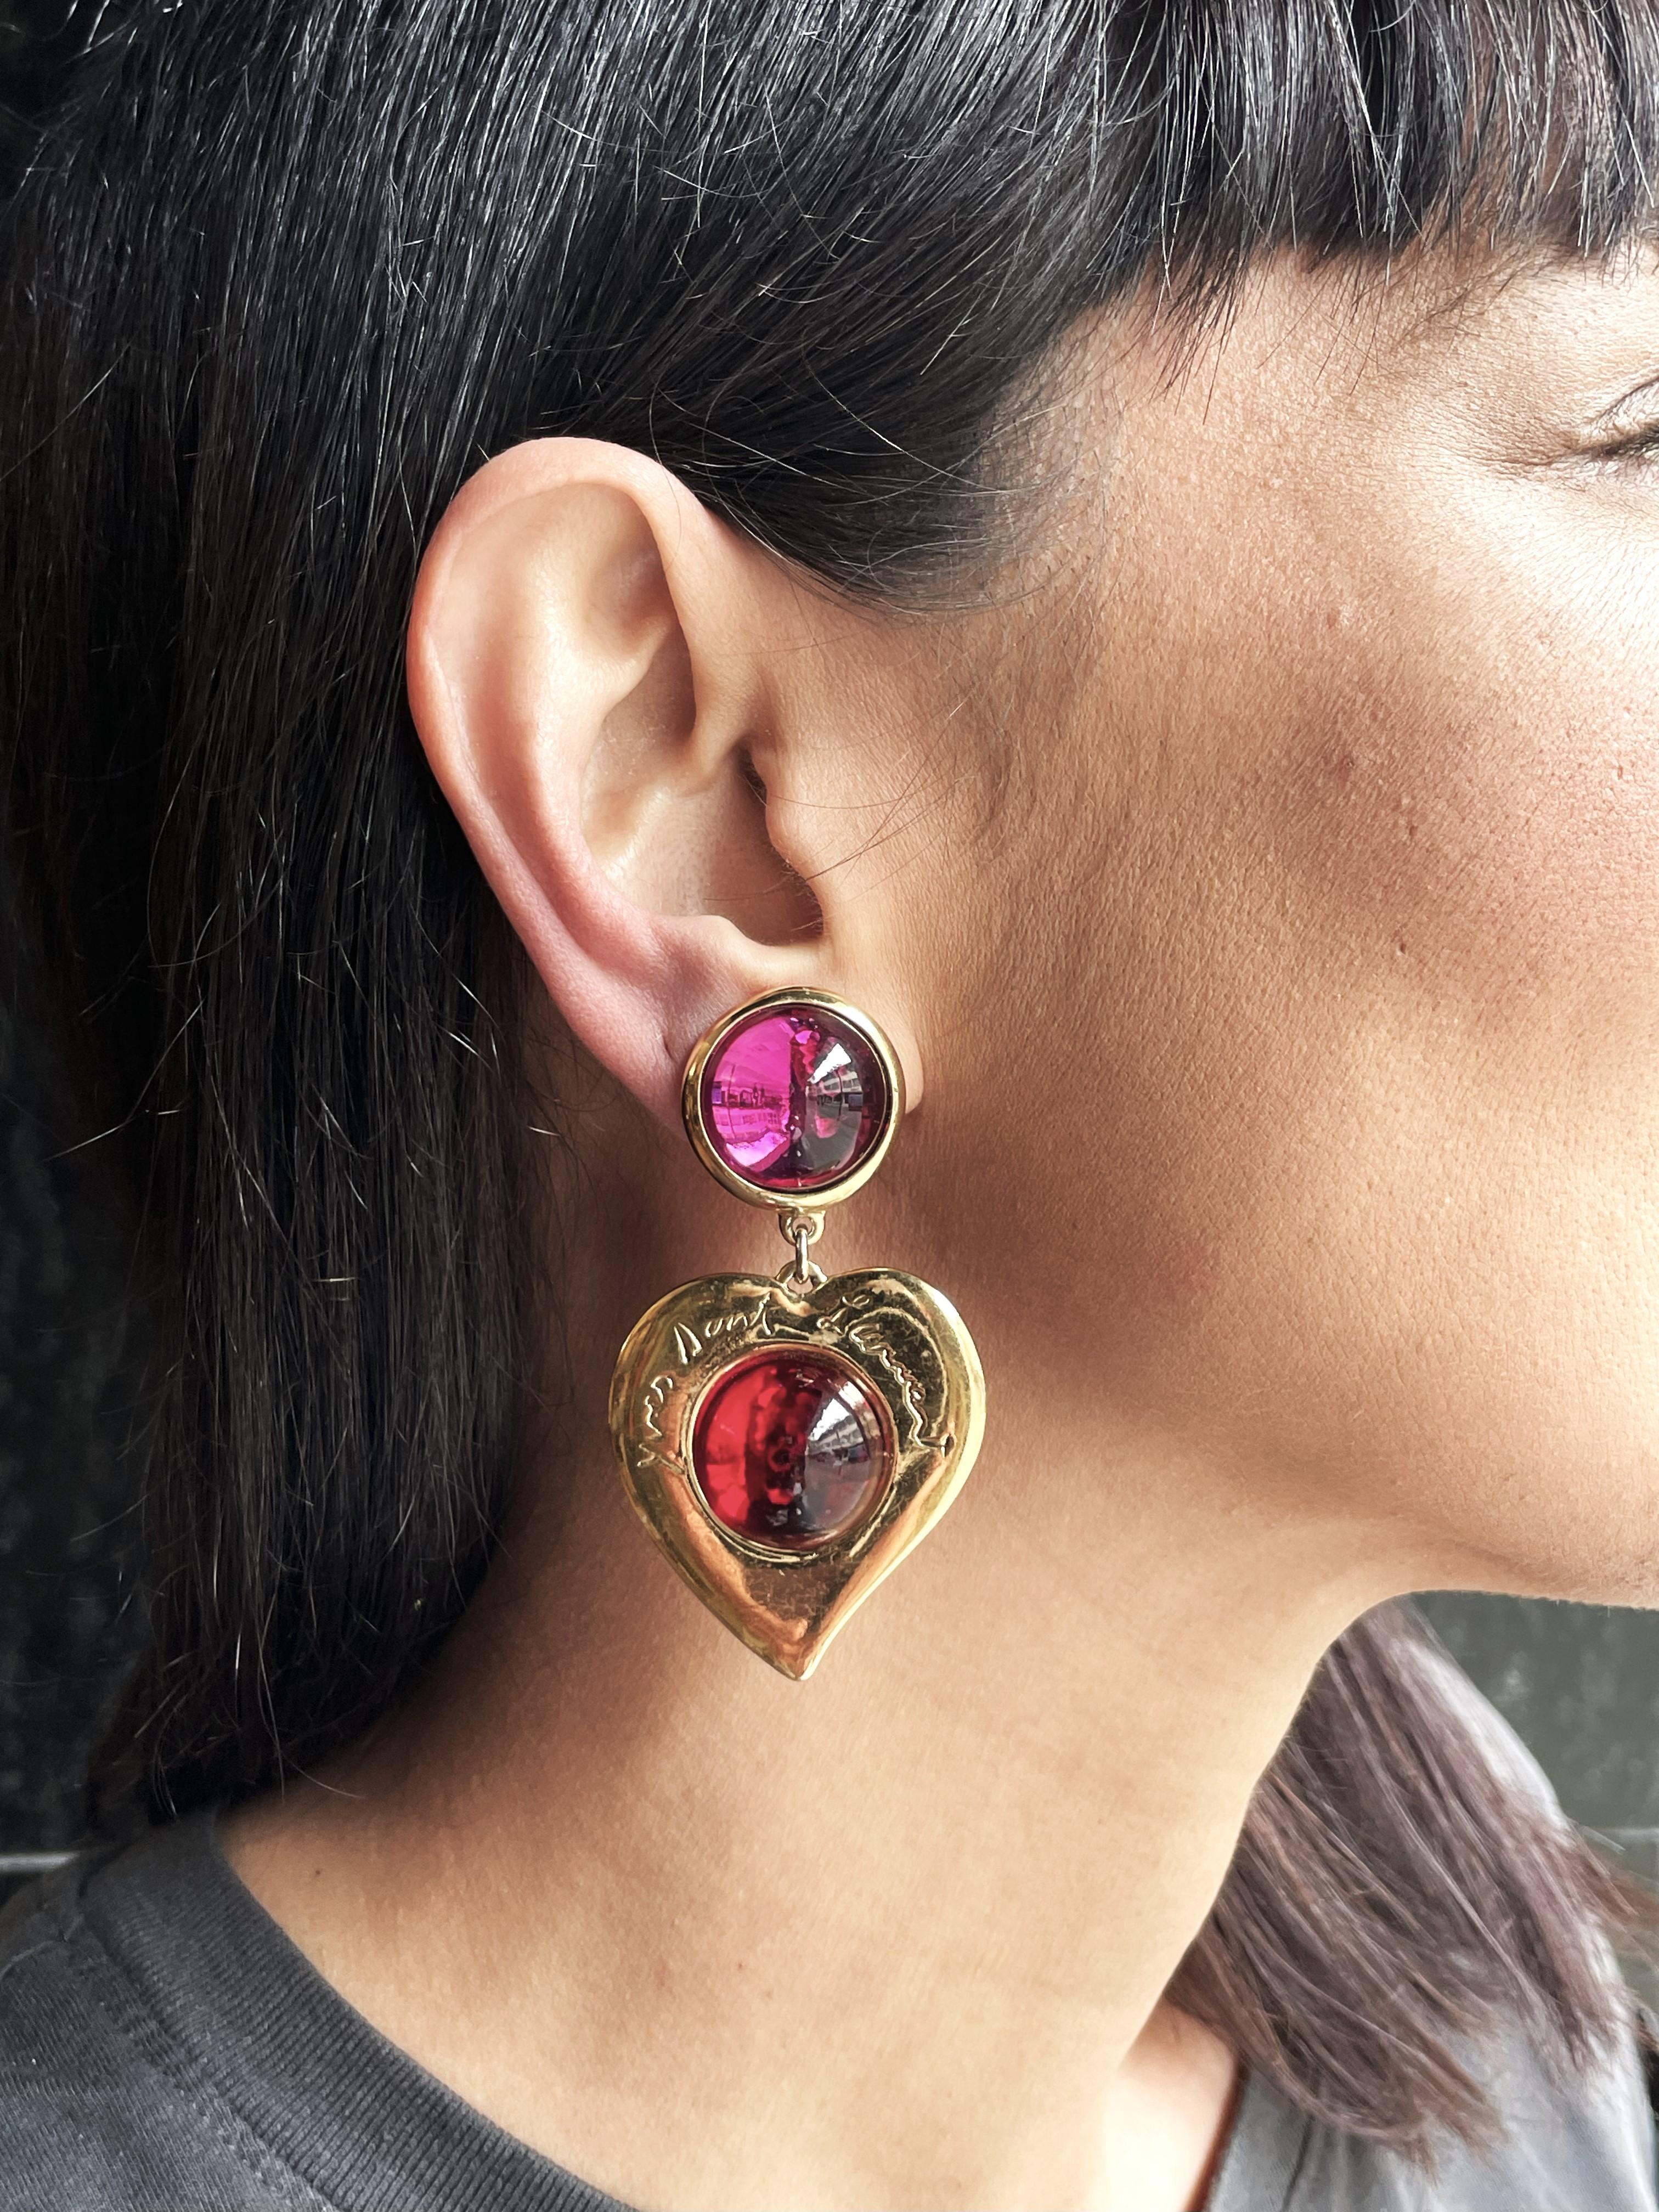 Truly magnificent, fabulous and over sized HEART earring, in vibrant and dynamic shades of shocking red and pink. 
Trualy glamorous and so typical of Yves St. Laurent, these are true runway stars, adding glamour to their fortunate wearer.
The top of